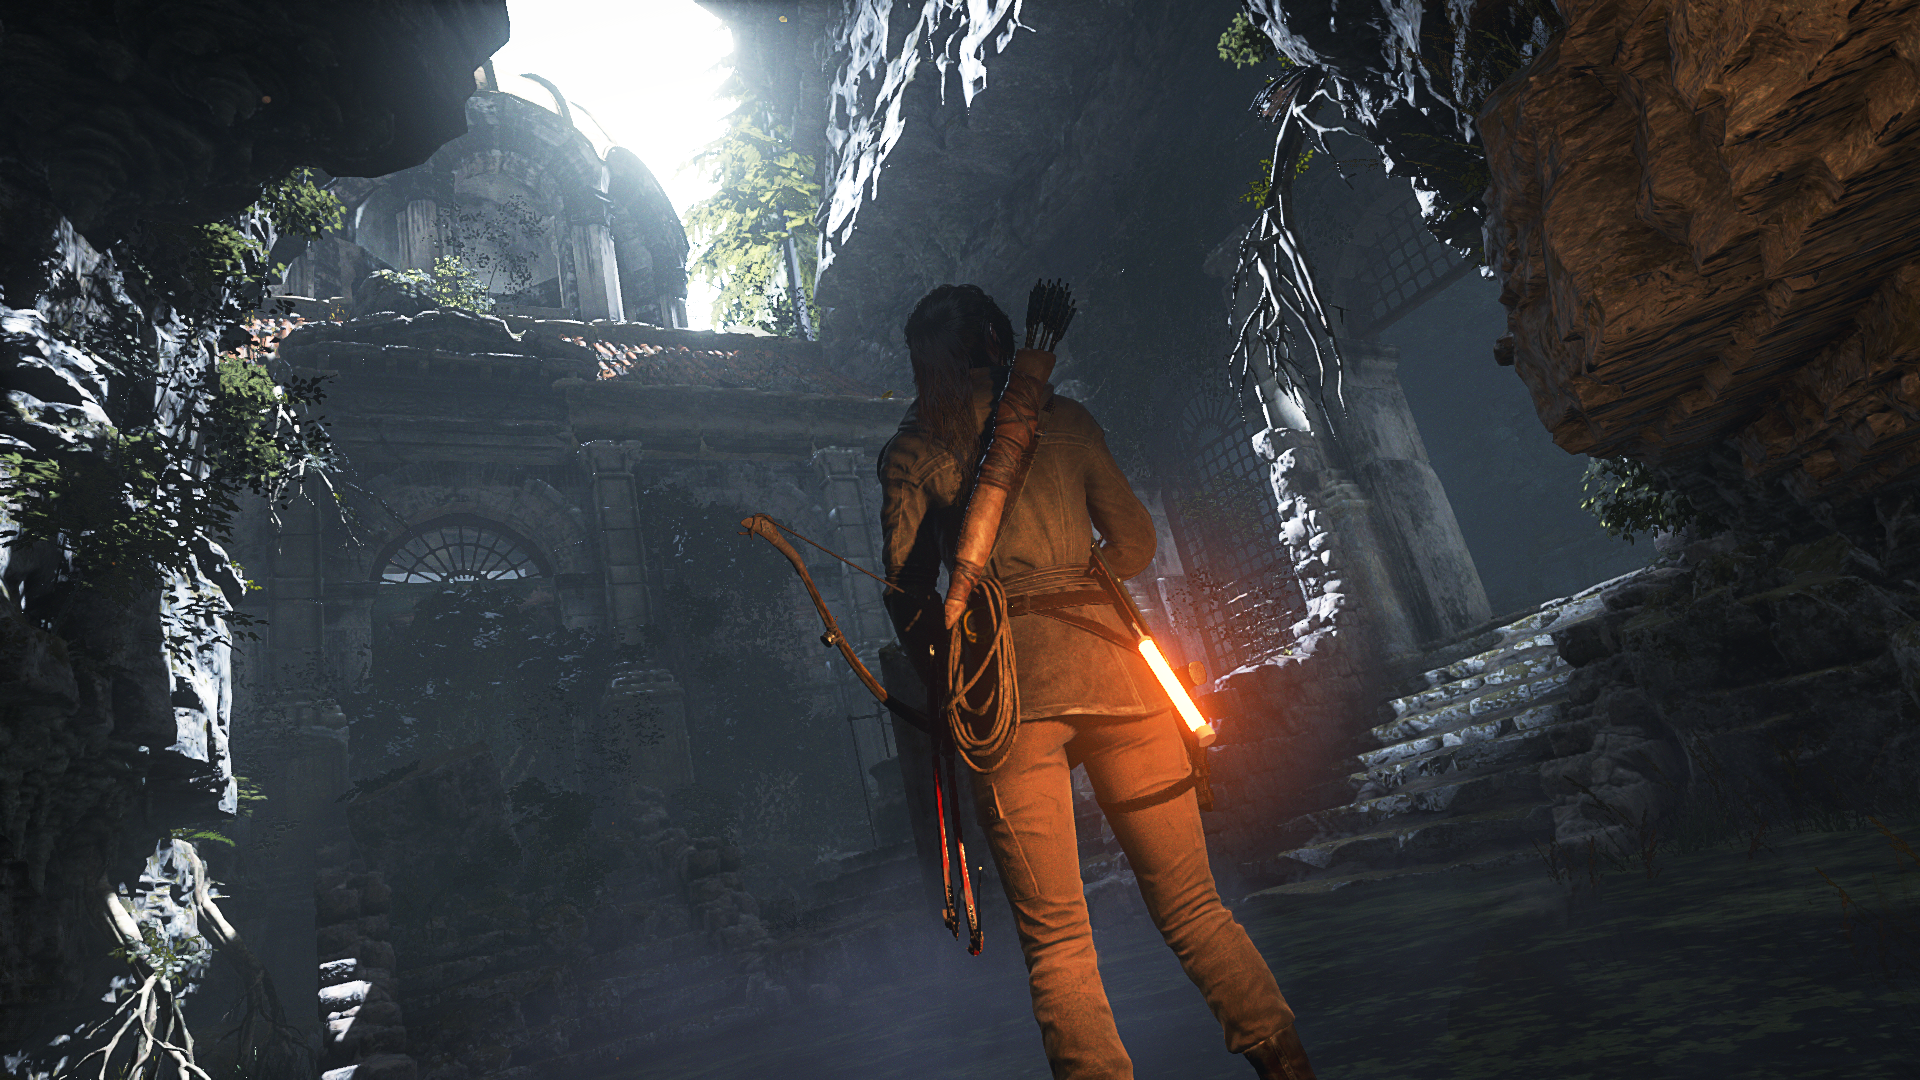 Media asset in full size related to 3dfxzone.it news item entitled as follows: Disponibile la prima patch del game Rise of the Tomb Raider per PC | Image Name: news23748_Rise-of-the-Tomb-Raider-Screenshot_1.png